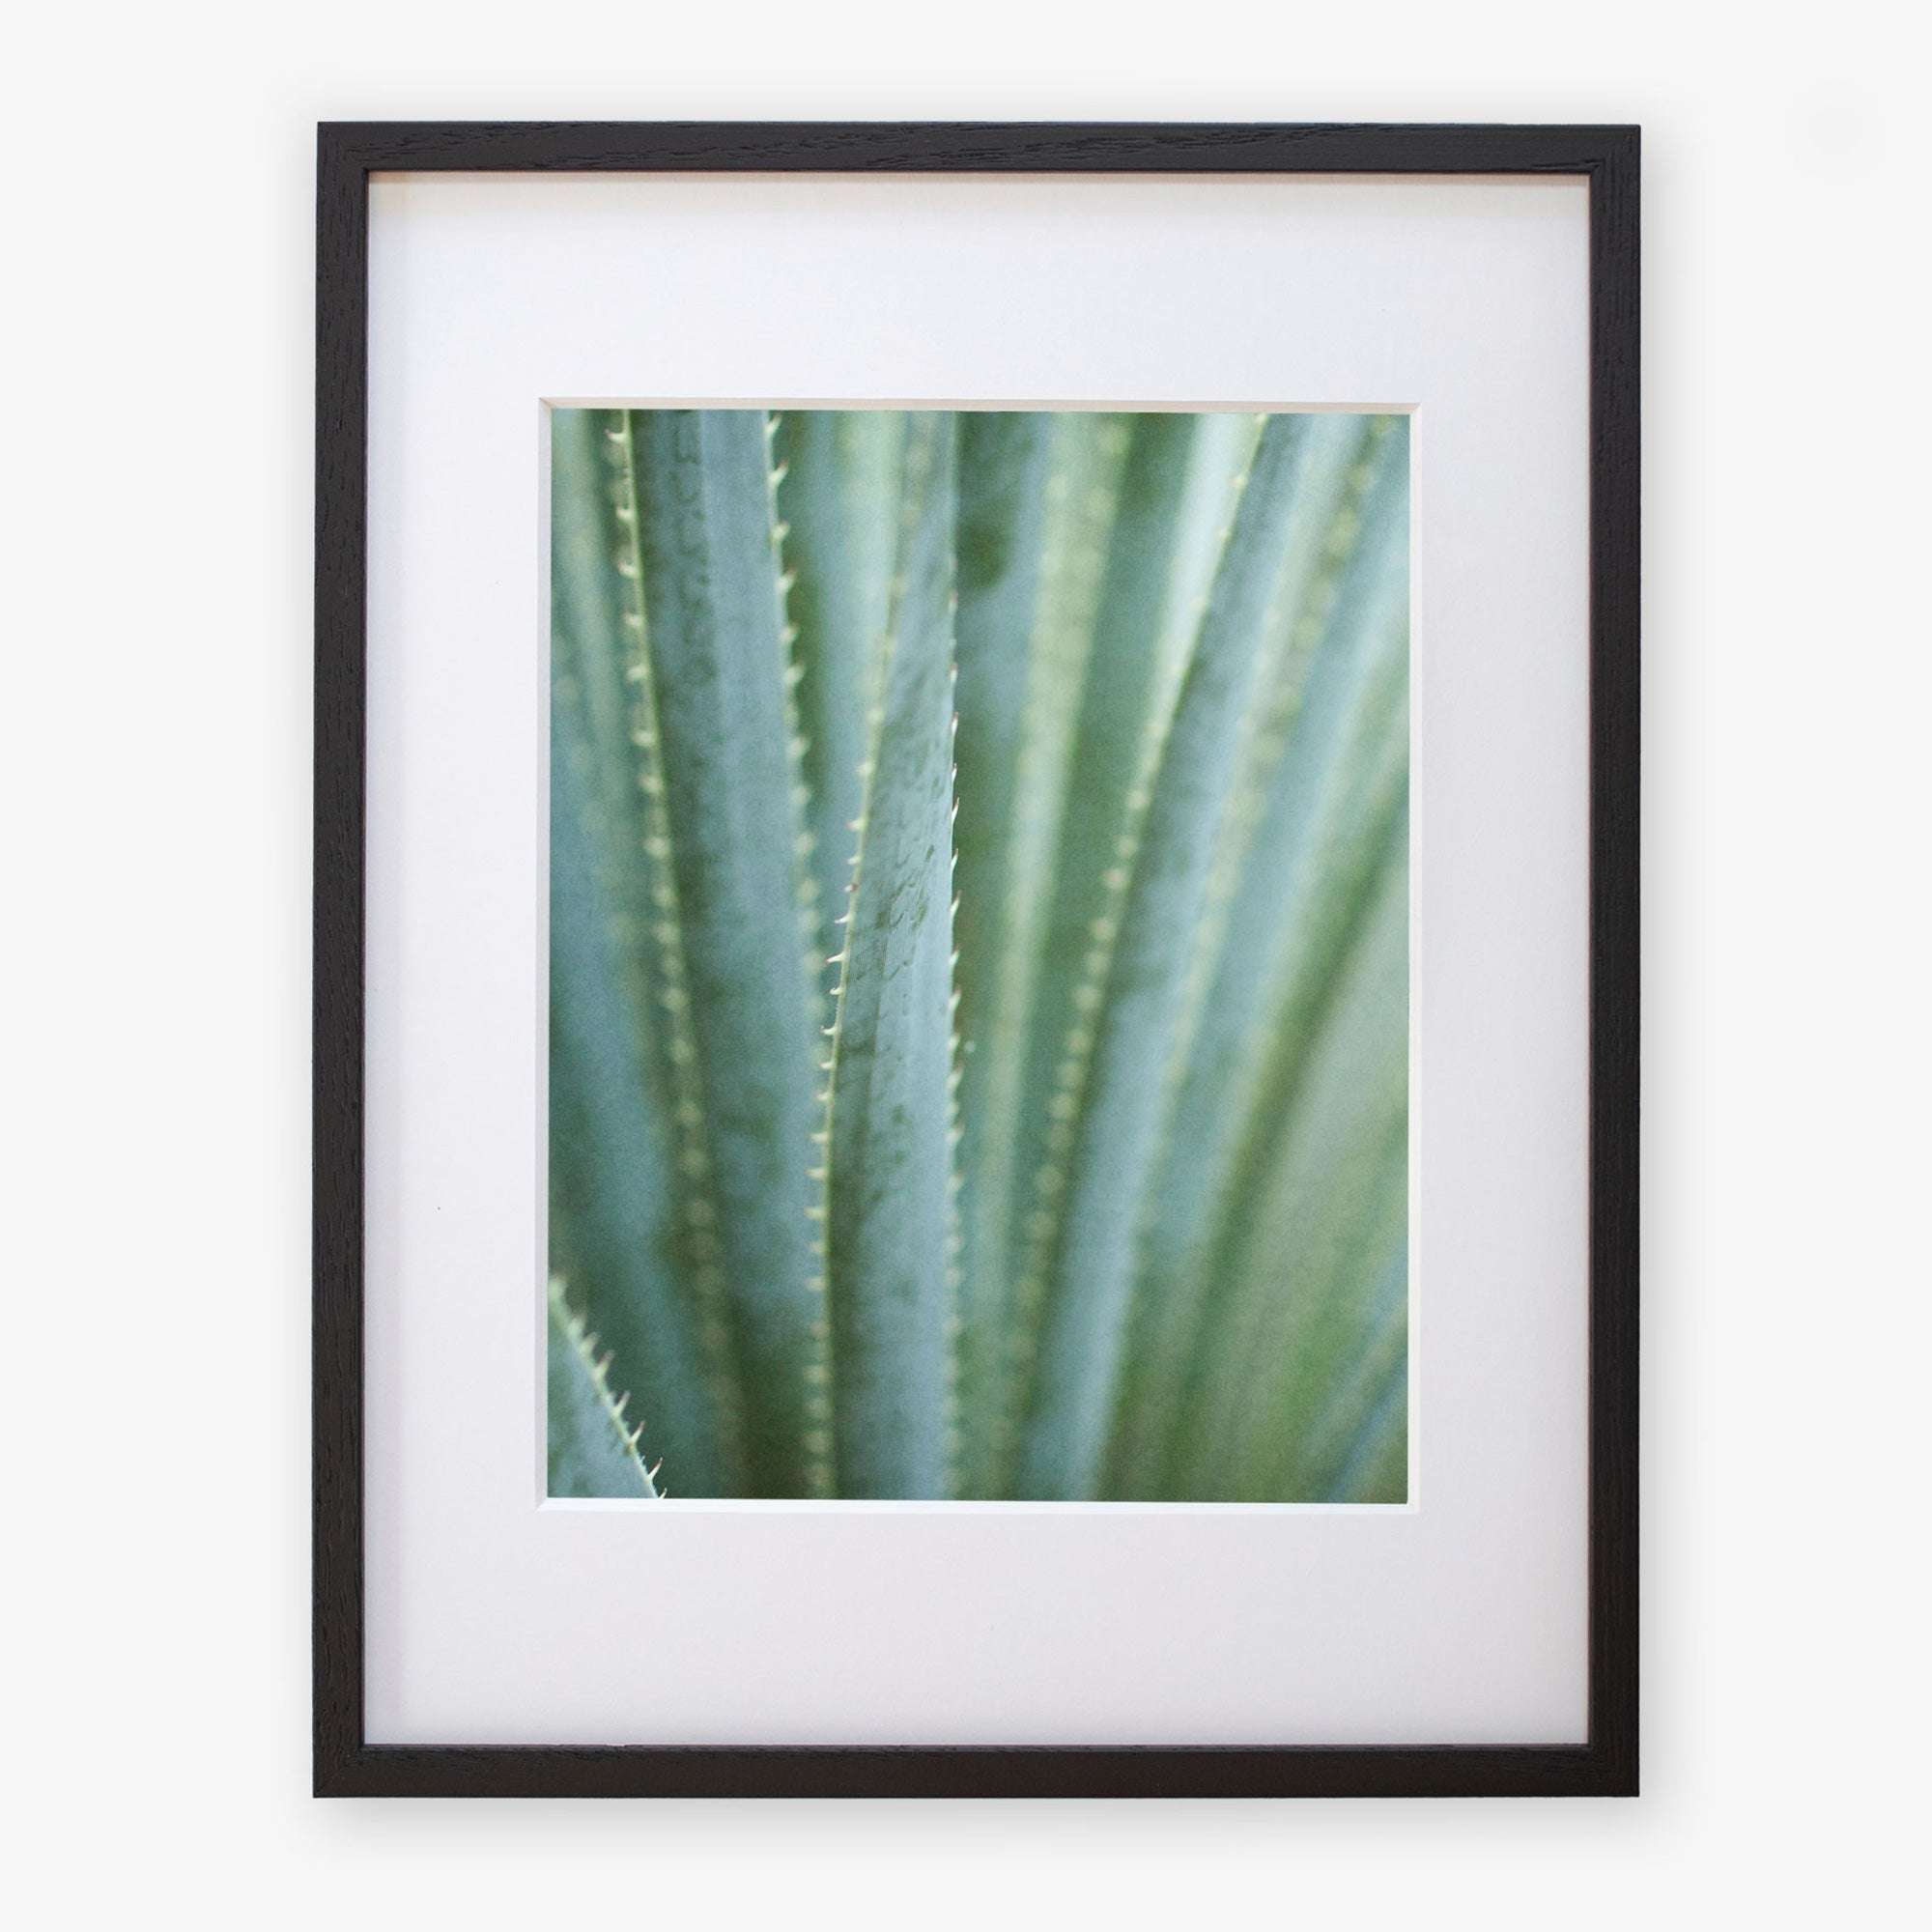 Close-up photo of a Green Botanical Print, &#39;Strands and Spikes II&#39; by Offley Green, printed on archival photographic paper, unframed, against a white background.